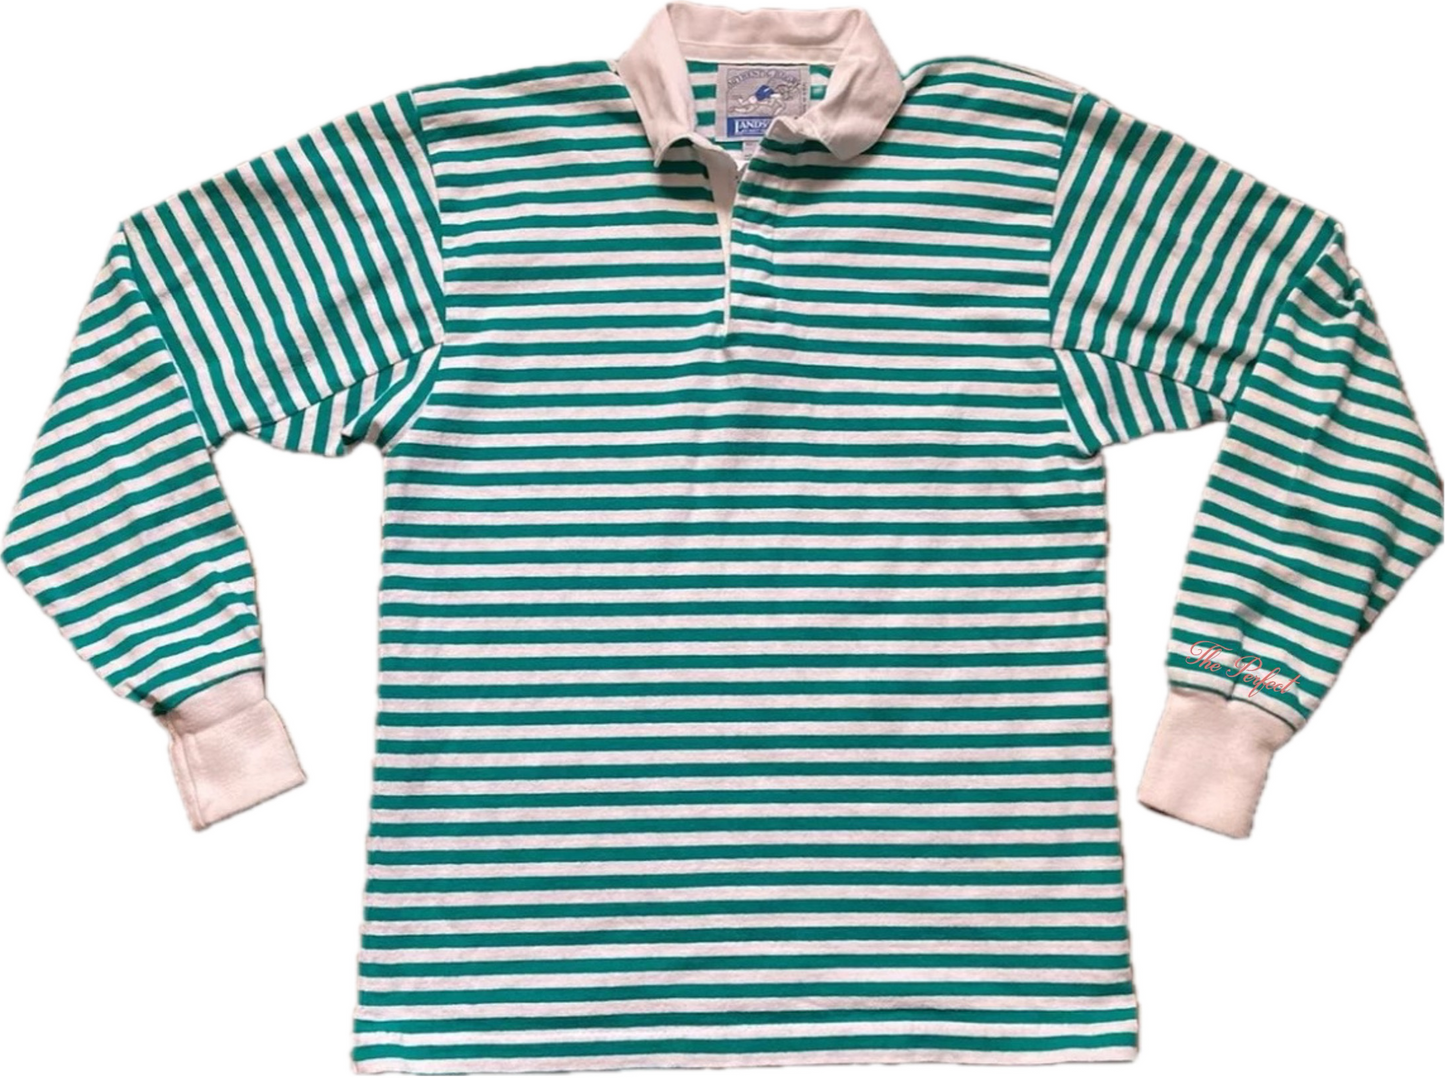 The Perfect Vintage Green Striped Rugby Shirt